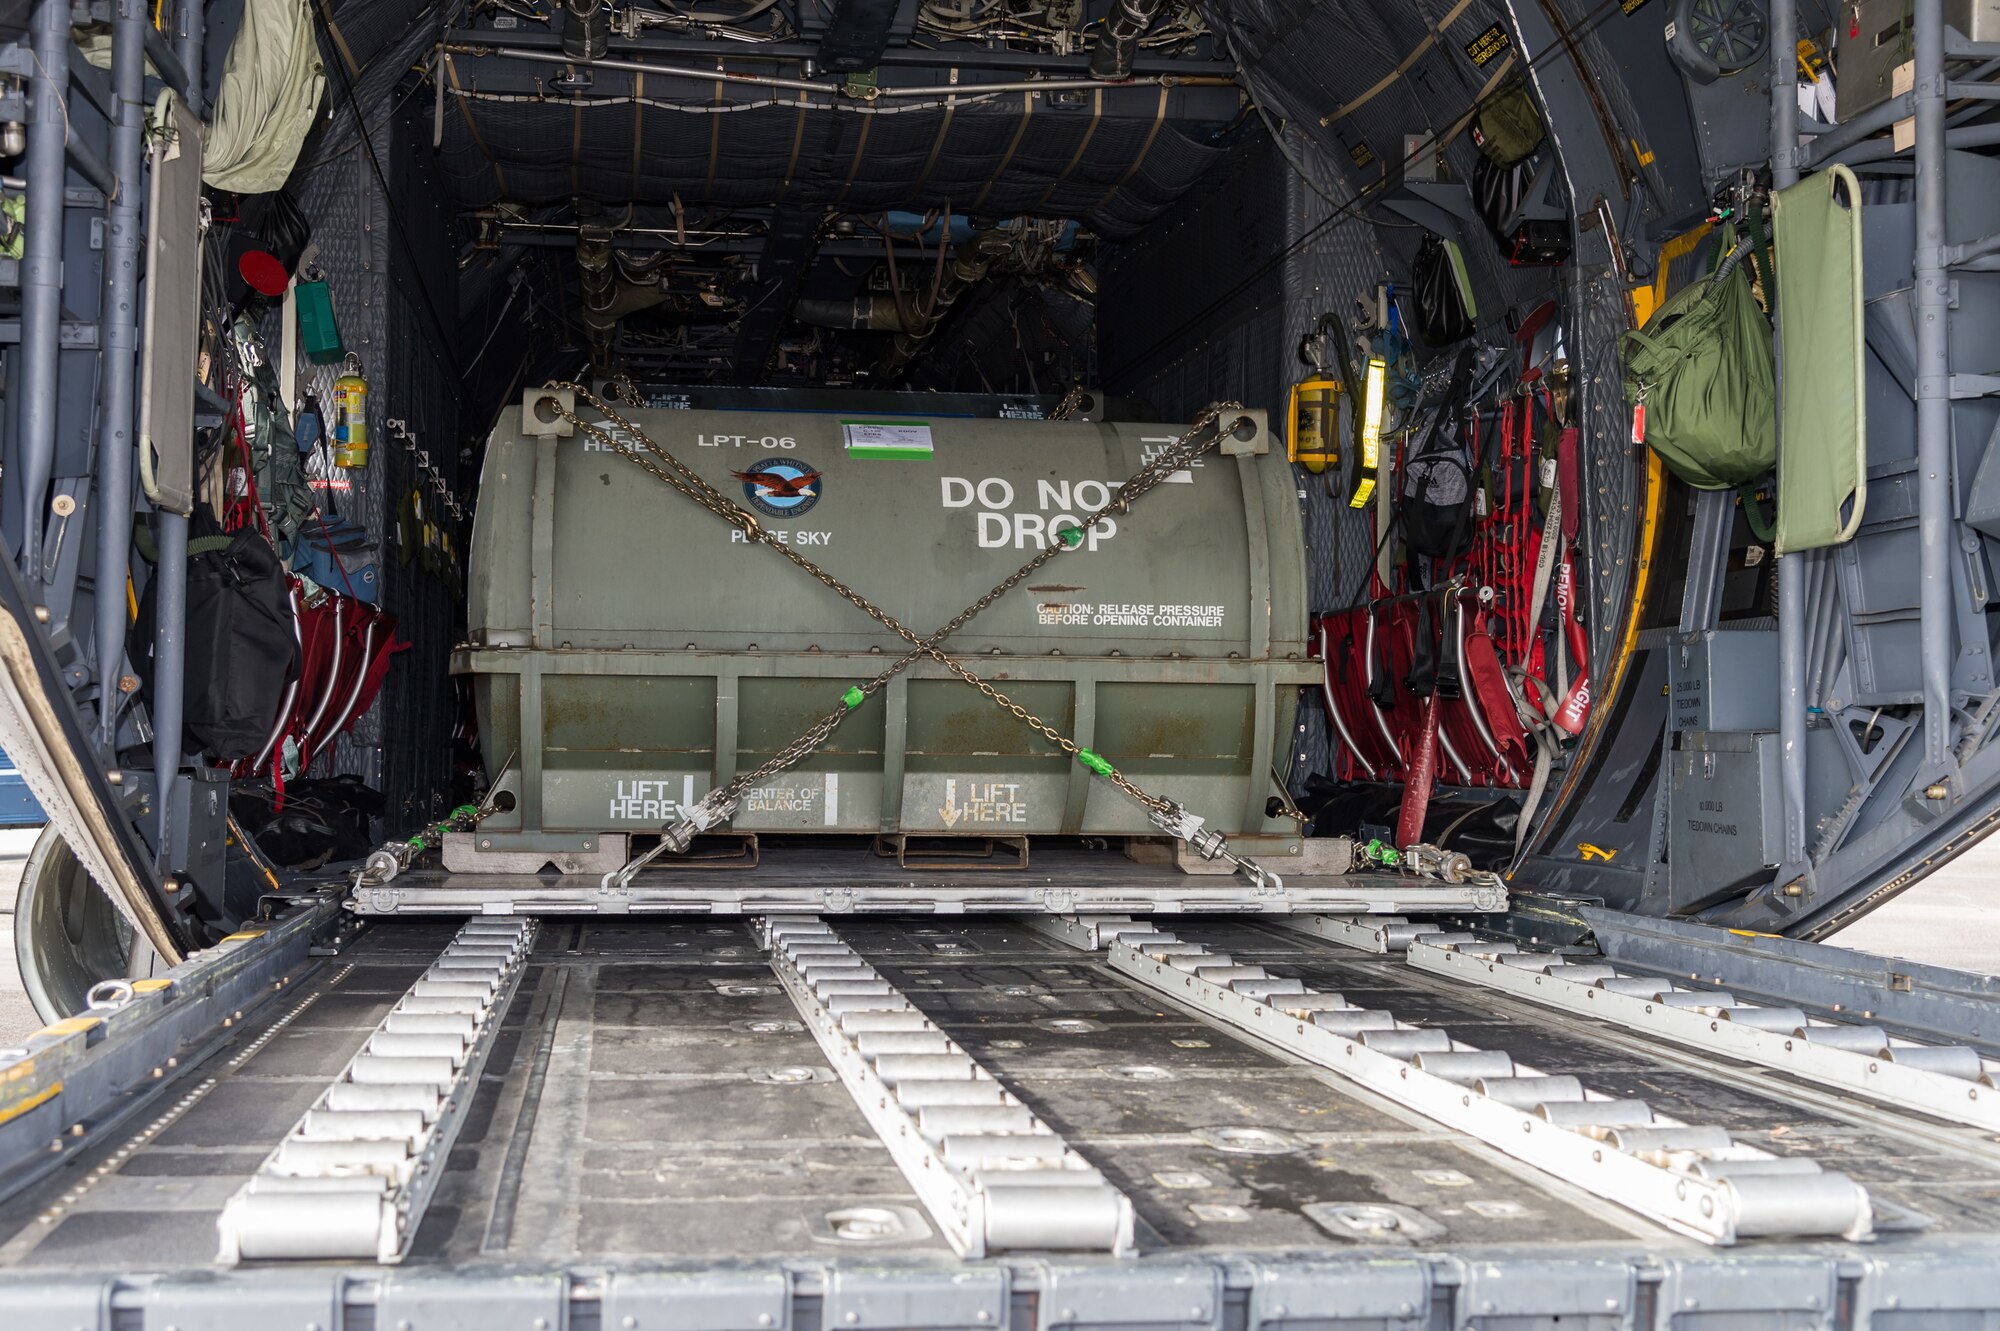 Cargo on a Polish air force C-130E Hercules sits ready to be unloaded by Airmen from the 436th Aerial Port Squadron Dec. 17, 2020, at Dover Air Force Base, Delaware, as part of a foreign military sales mission. The United States and Poland have enjoyed warm bilateral relations since 1989. Poland is a stalwart NATO ally, and both the U.S. and Poland remain committed to the regional security and prosperity of Europe. Due to its strategic location, Dover AFB supports approximately $3.5 billion worth of foreign military sales annually. (U.S. Air Force photo by Roland Balik)